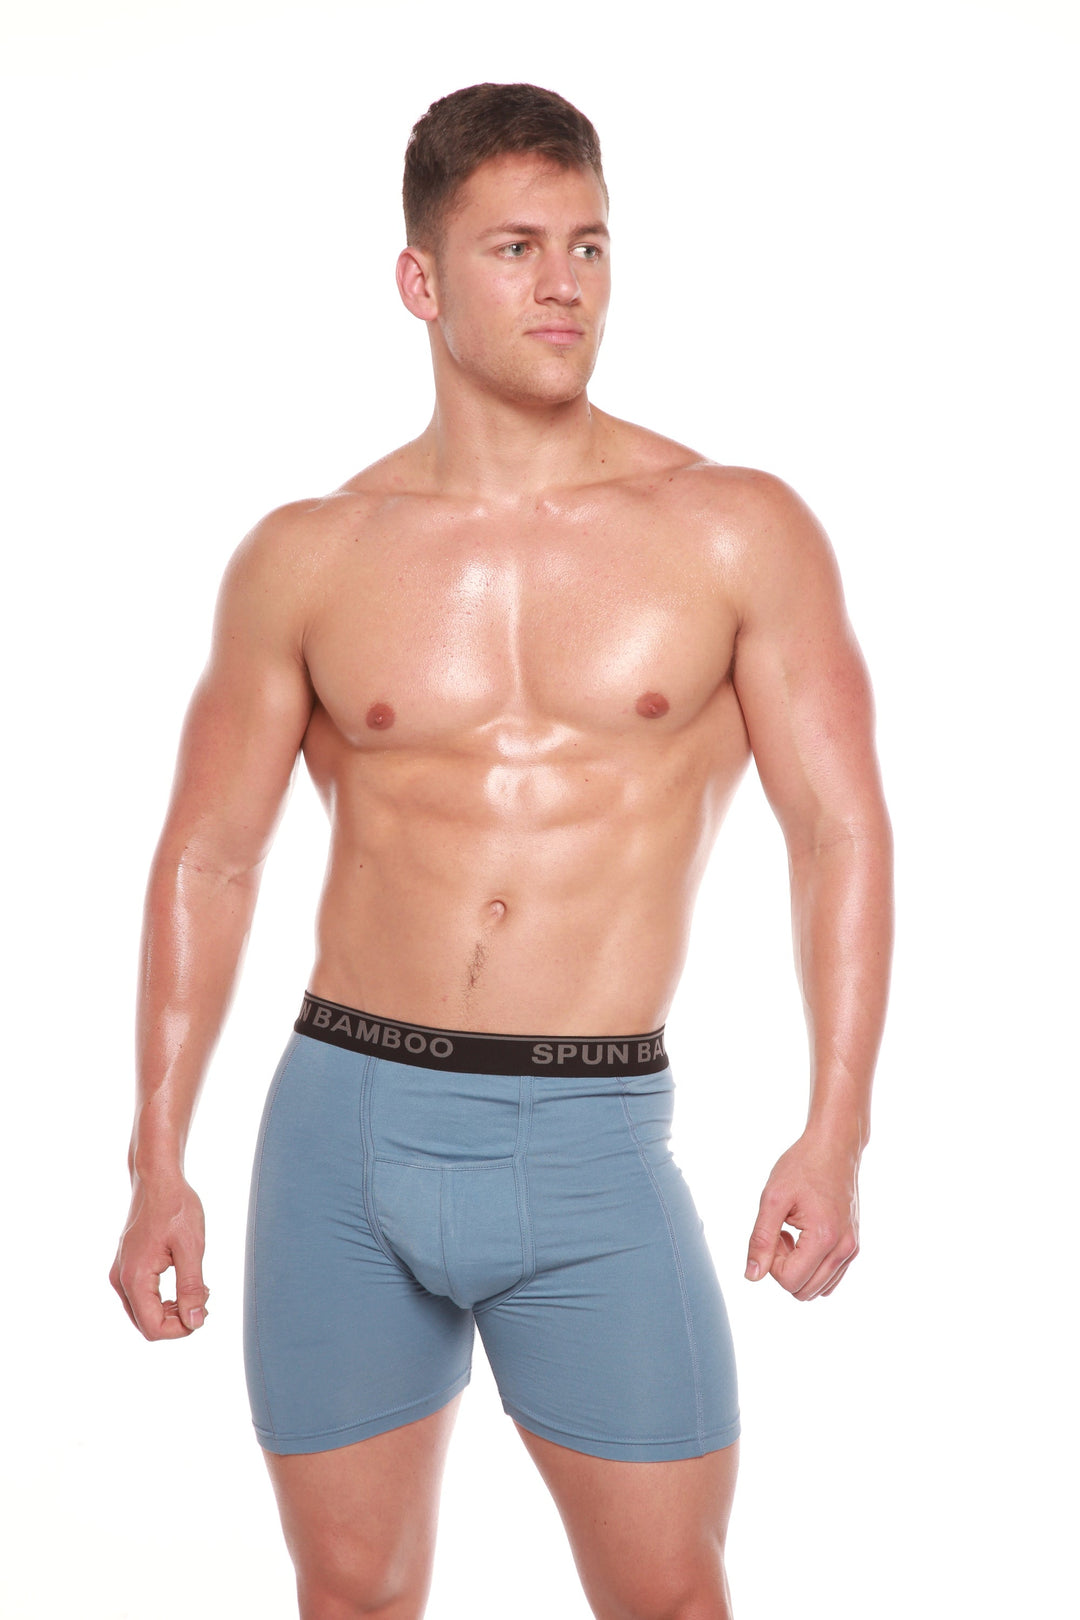 Boody Body EcoWear Men's Boxer Briefs, Mens Underwear, Soft Breathable,  Seamless Comfort, Viscose Made From Bamboo